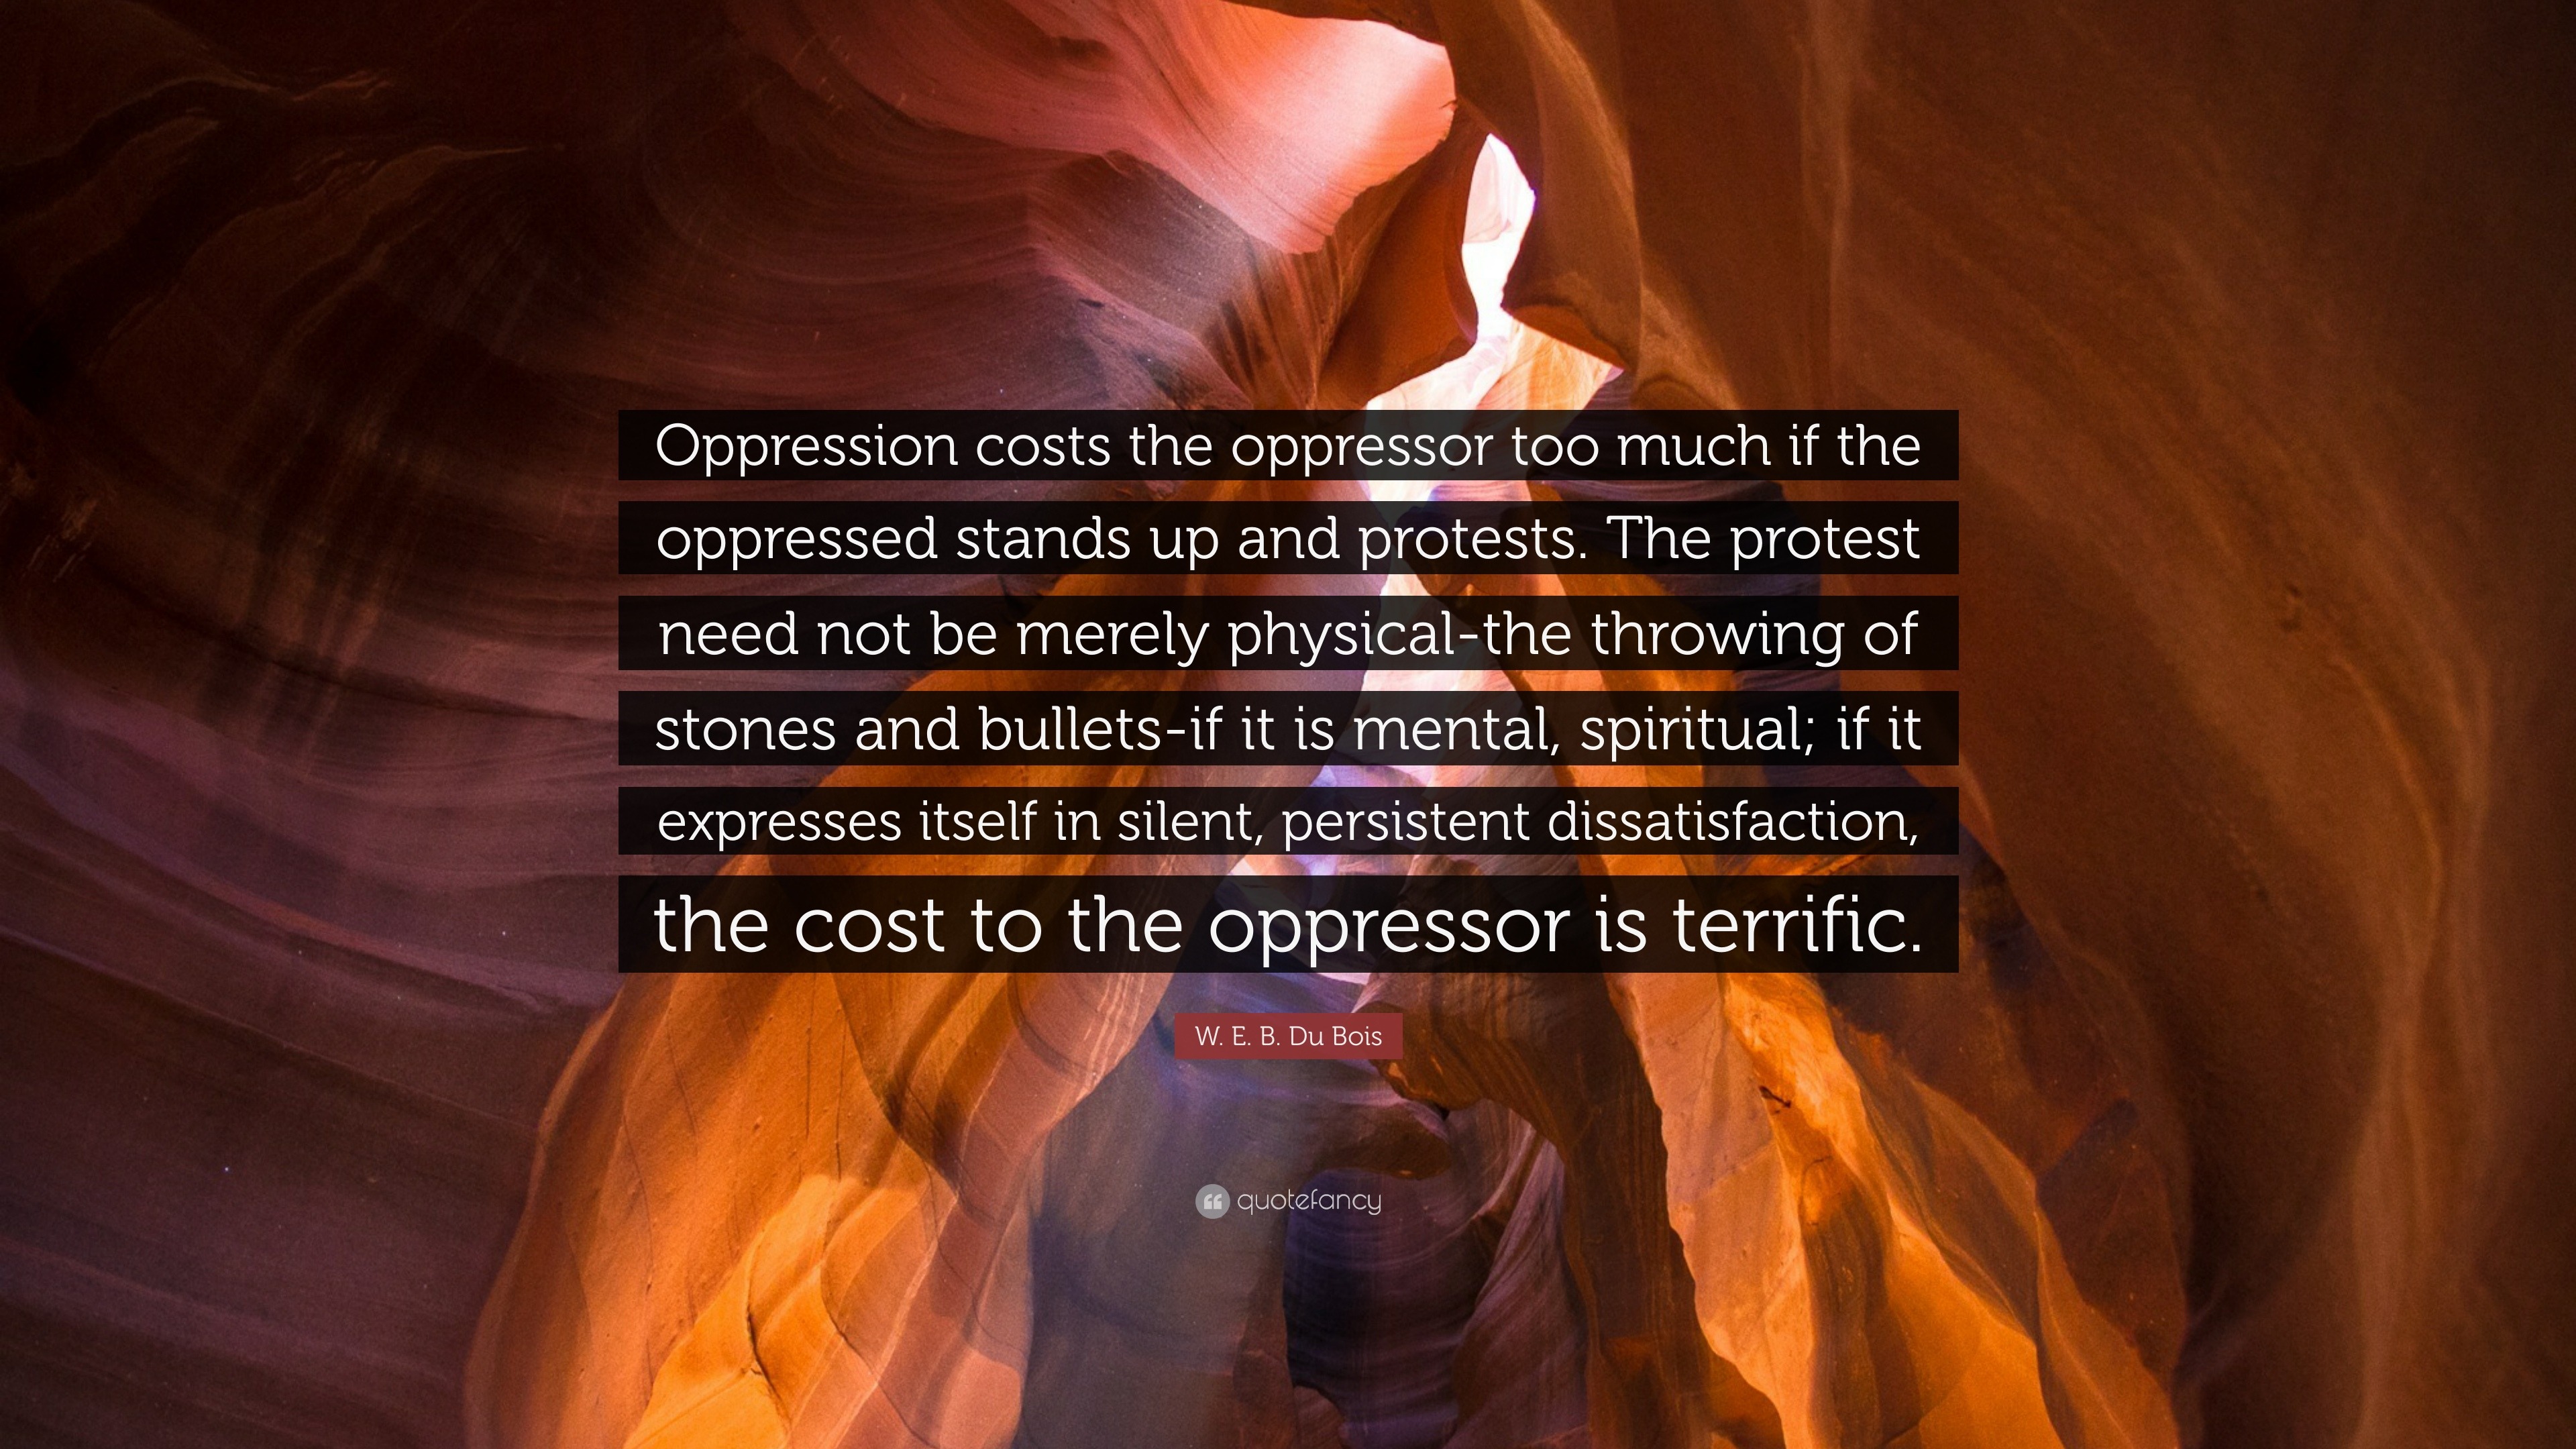 https://quotefancy.com/media/wallpaper/3840x2160/435625-W-E-B-Du-Bois-Quote-Oppression-costs-the-oppressor-too-much-if-the.jpg